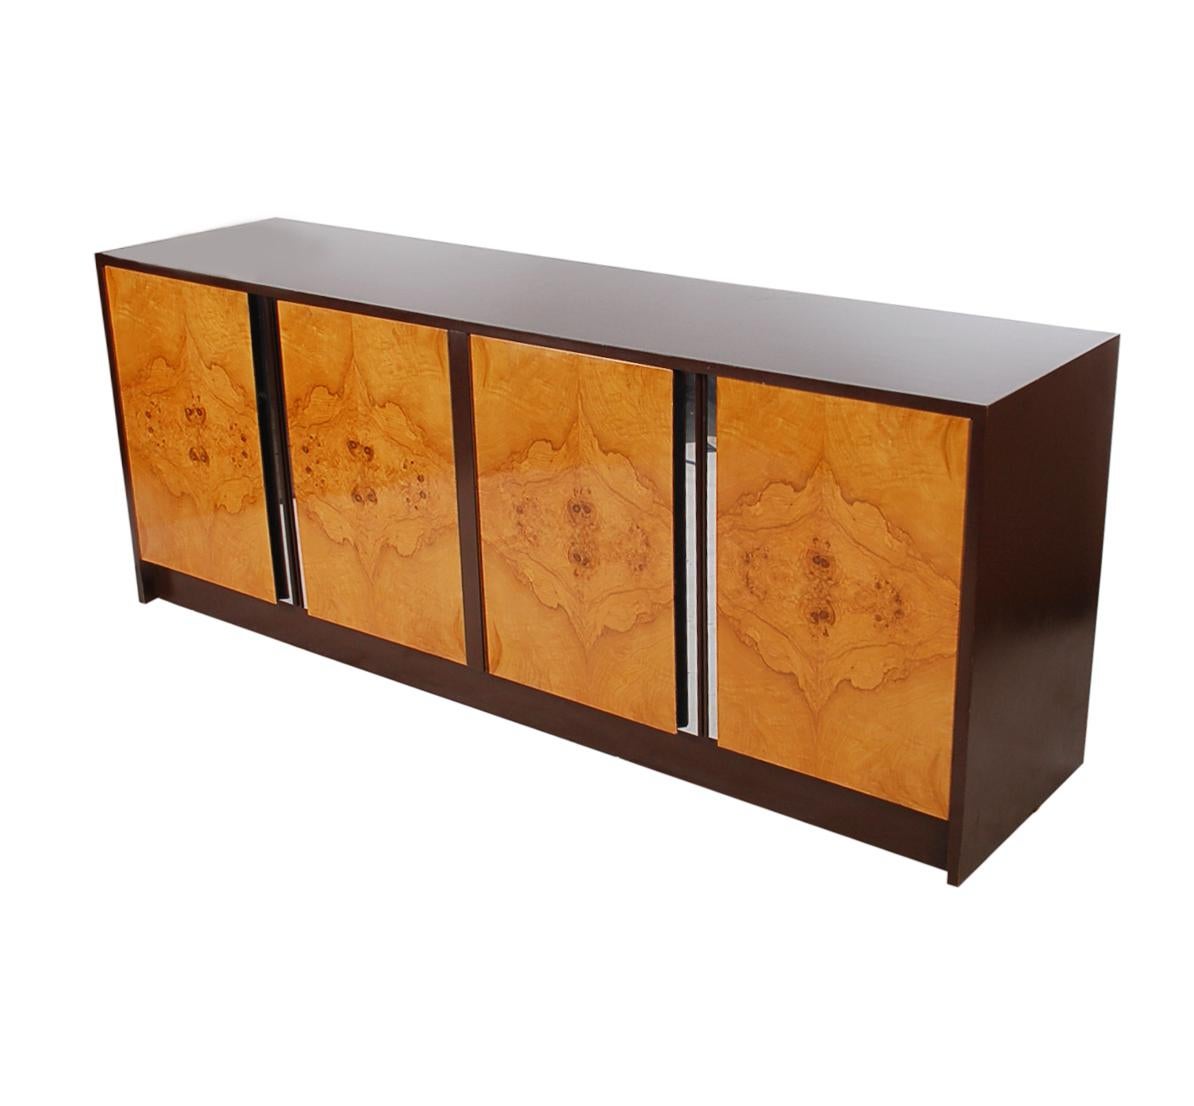 Late 20th Century Mid-Century Modern Burl Credenza or Cabinet after Milo Baughman For Sale